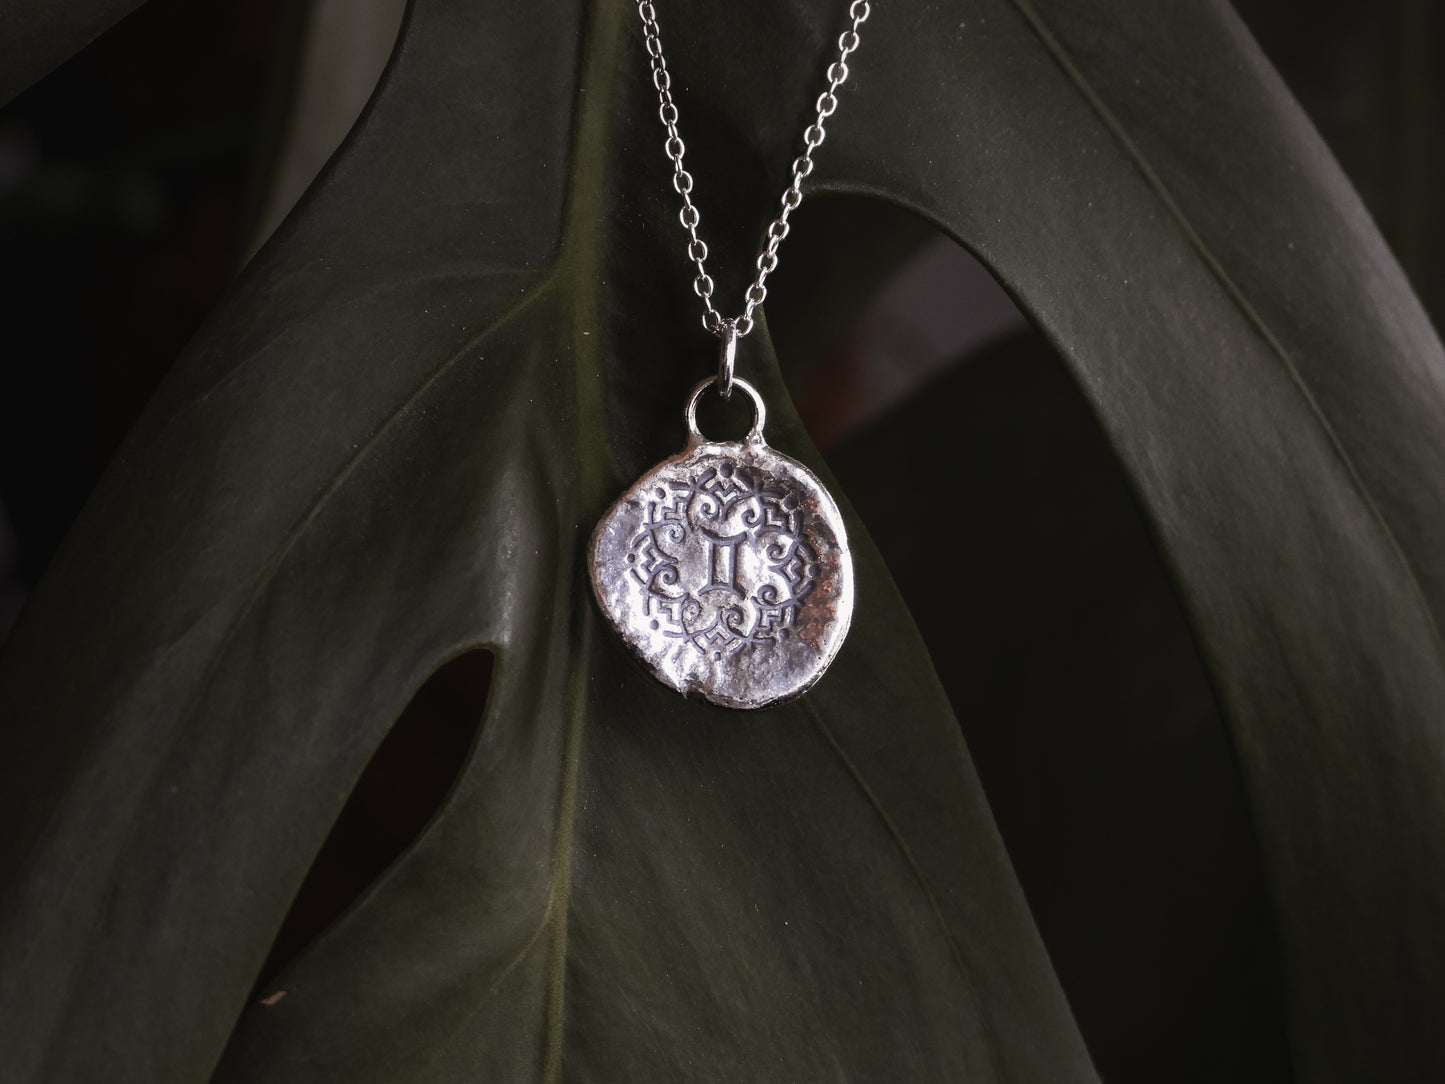 rustic and organic gemini star sign coin necklace